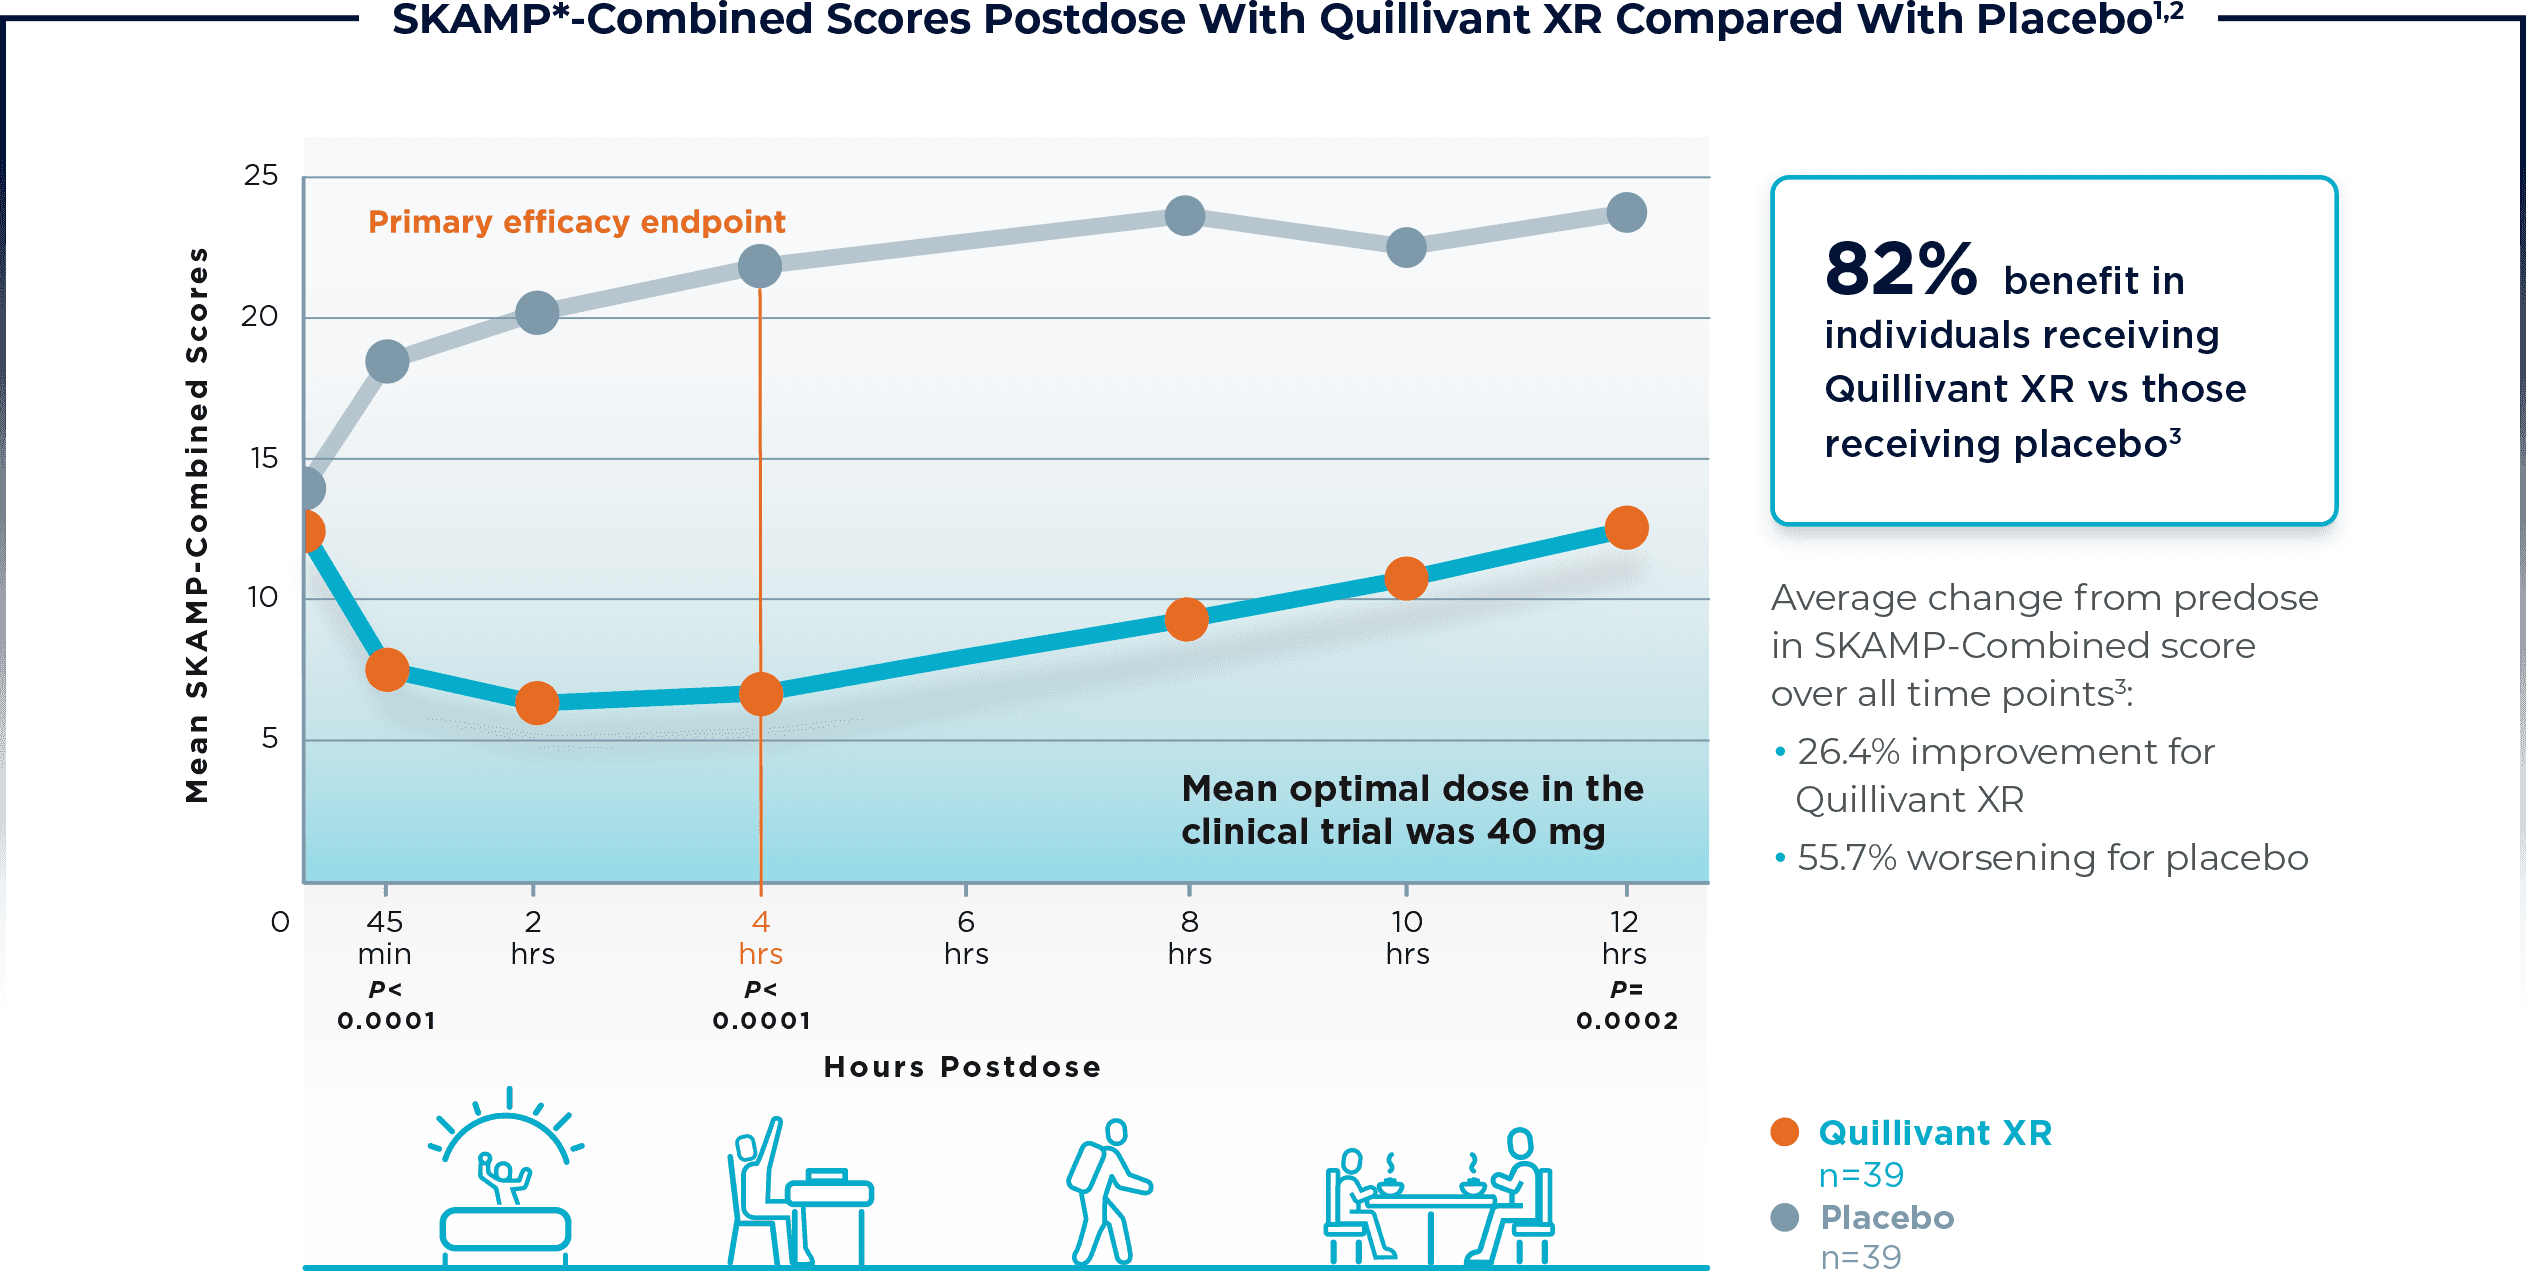 Graph: SKAMP-Combined Scores Postdose With Quillivant XR Compared With Placebo